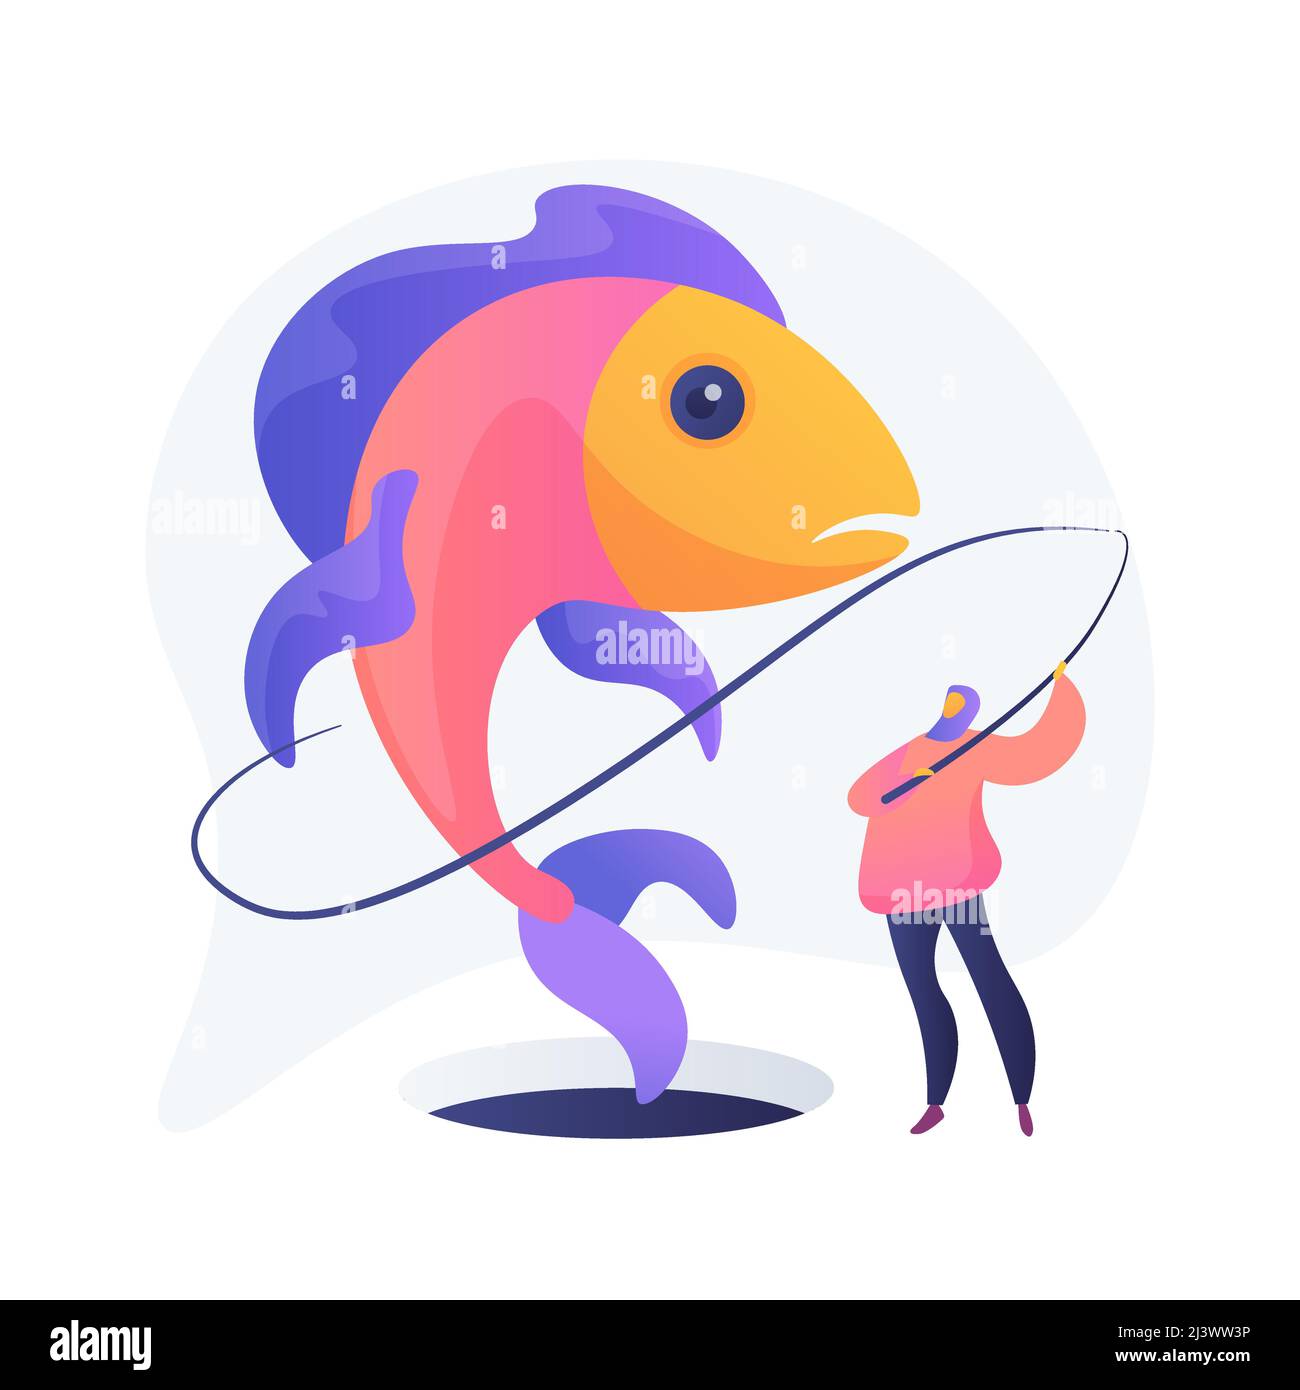 https://c8.alamy.com/comp/2J3WW3P/ice-fishing-abstract-concept-vector-illustration-winter-outdoor-activities-ice-fishing-tools-equipment-shop-online-fisherman-advice-catching-fro-2J3WW3P.jpg